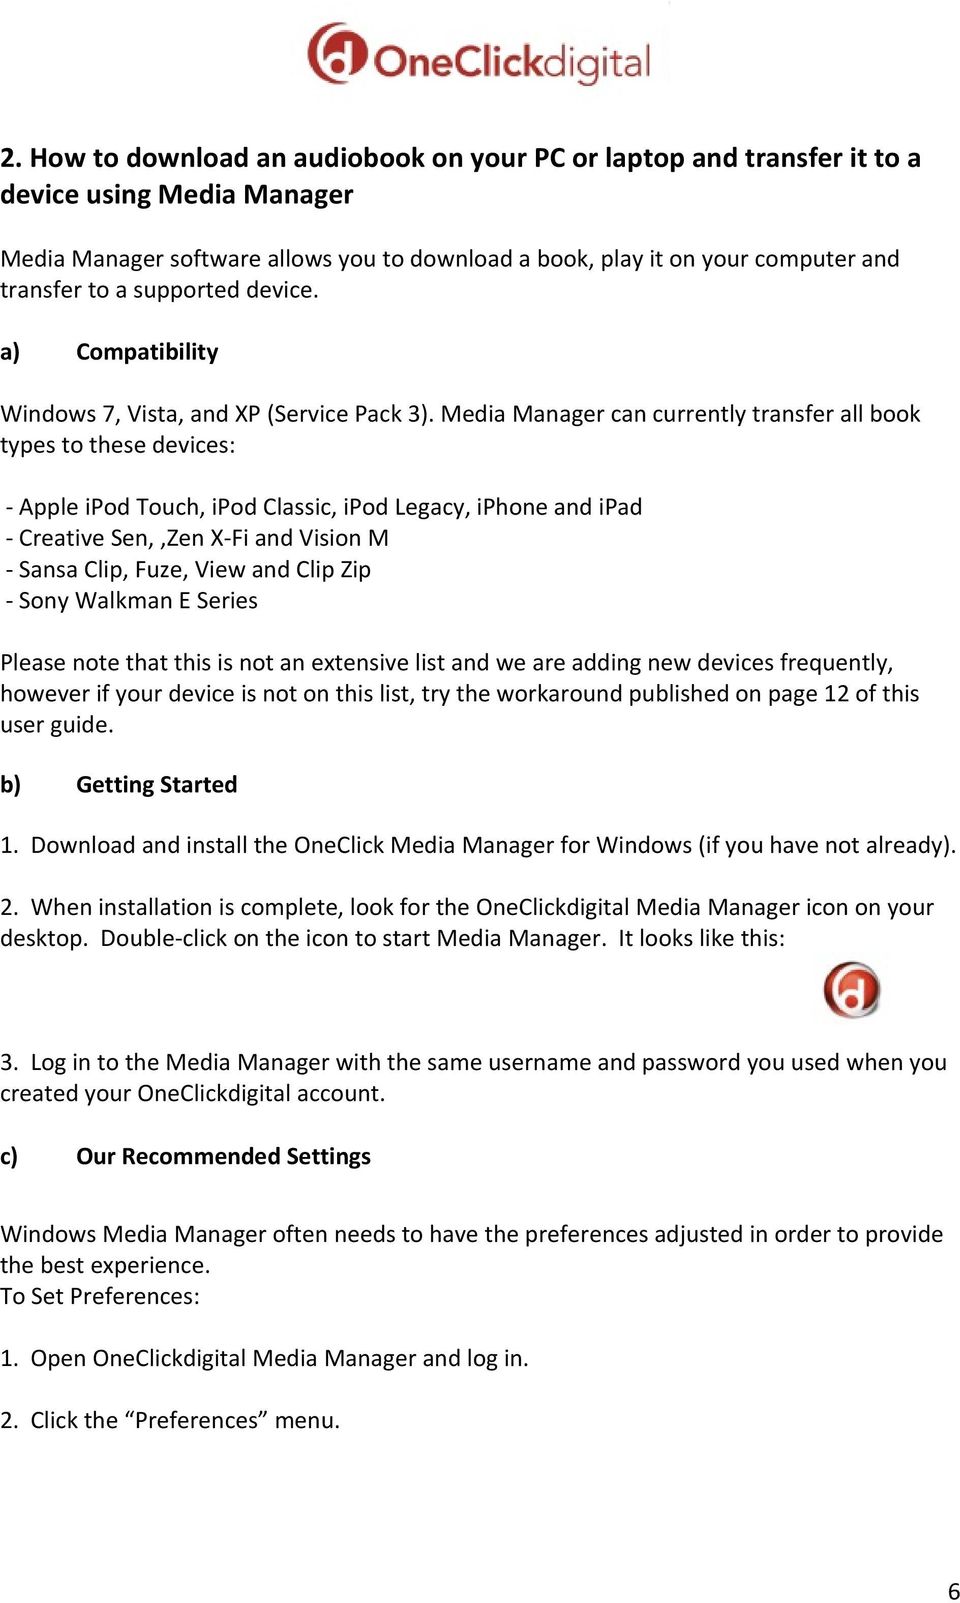 Media Manager can currently transfer all book types to these devices: Apple ipod Touch, ipod Classic, ipod Legacy, iphone and ipad Creative Sen,,Zen X Fi and Vision M Sansa Clip, Fuze, View and Clip